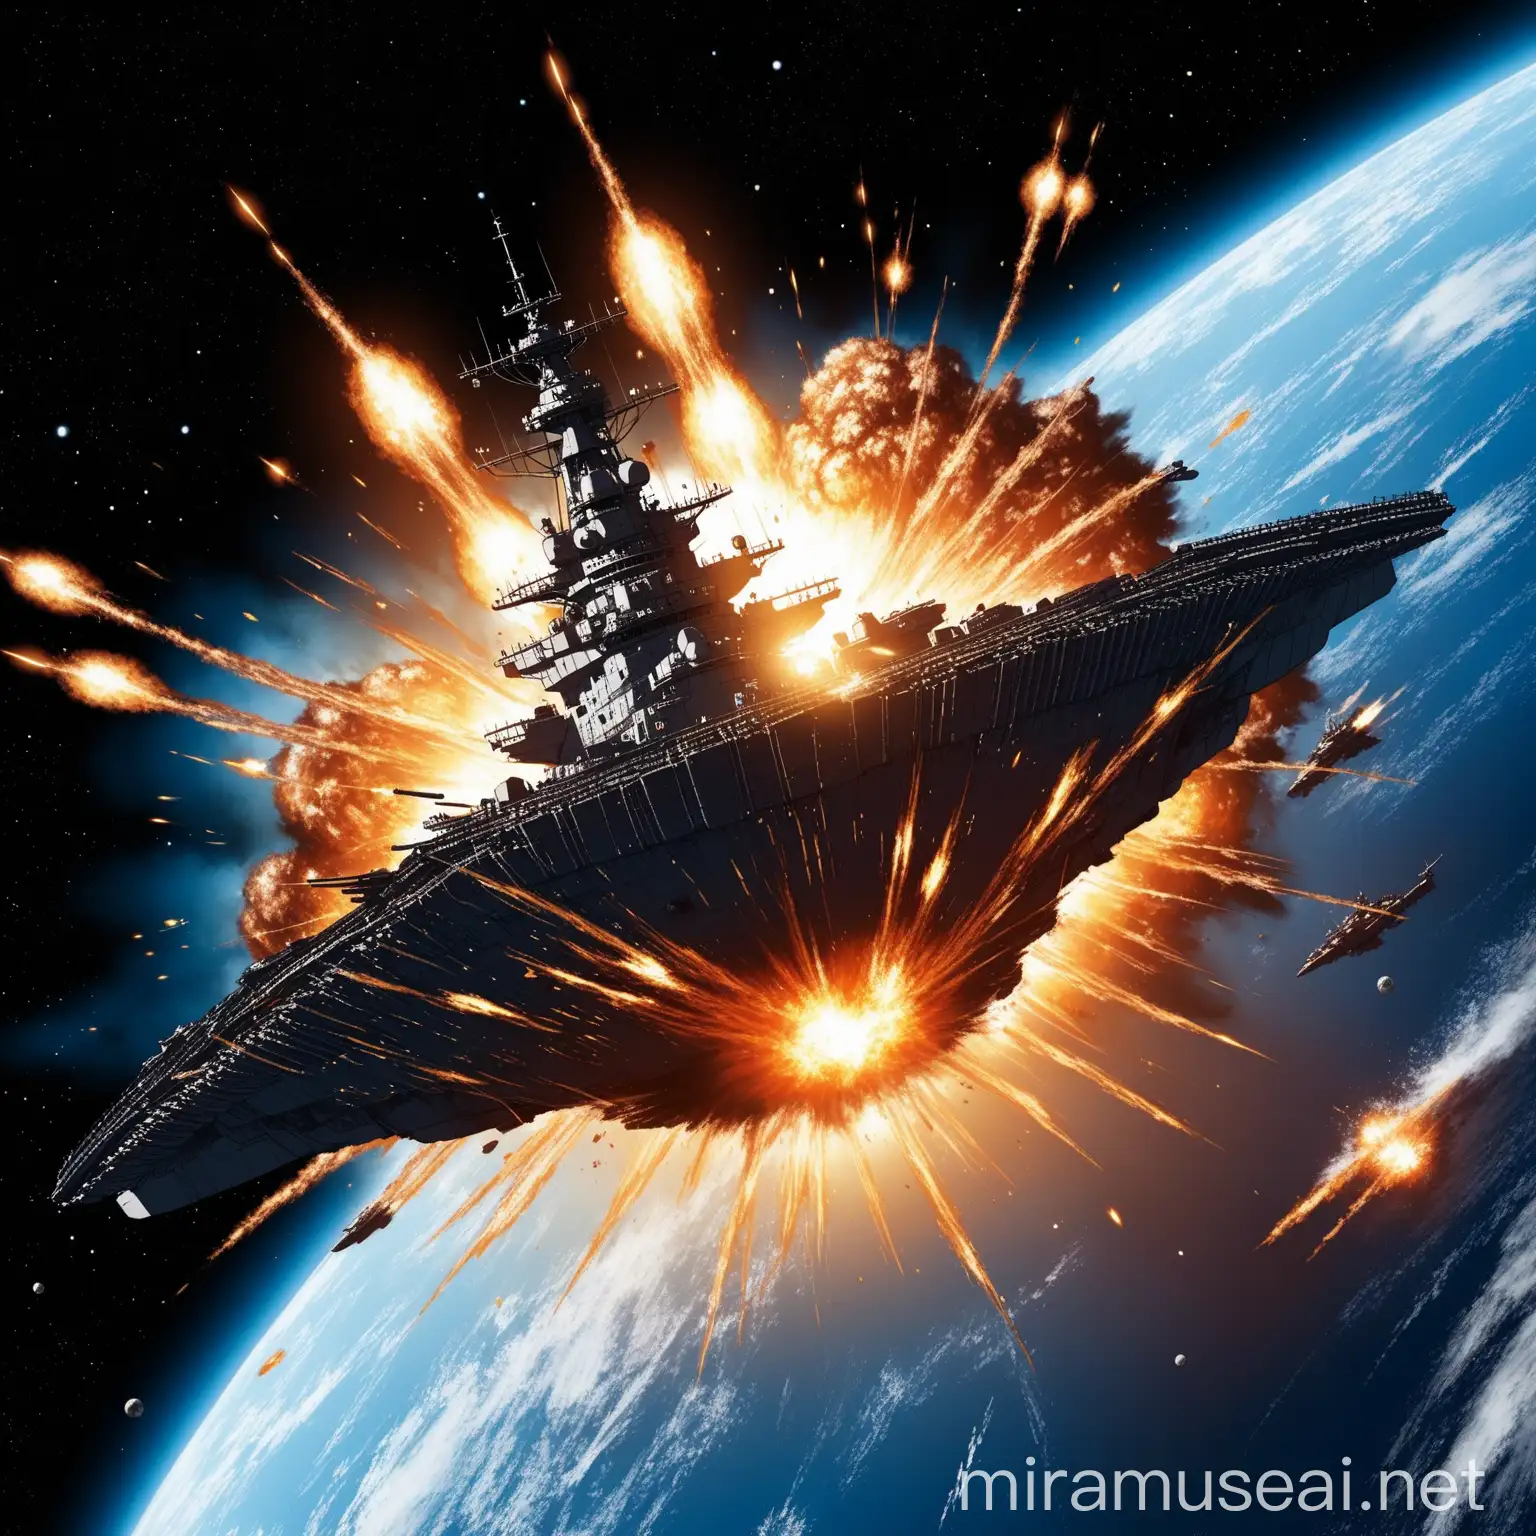 Battleship Explosion in Outer Space